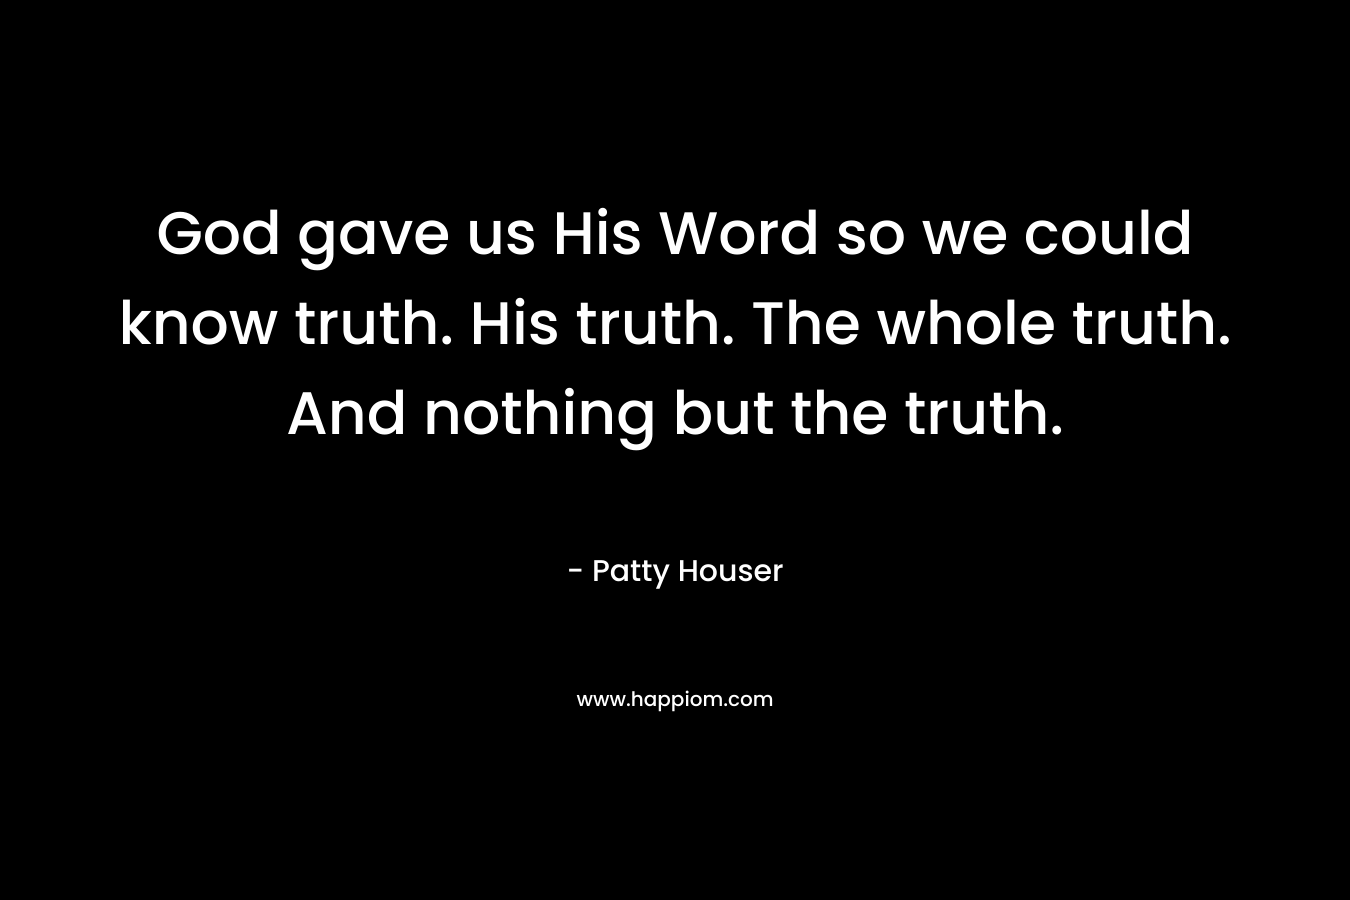 God gave us His Word so we could know truth. His truth. The whole truth. And nothing but the truth.